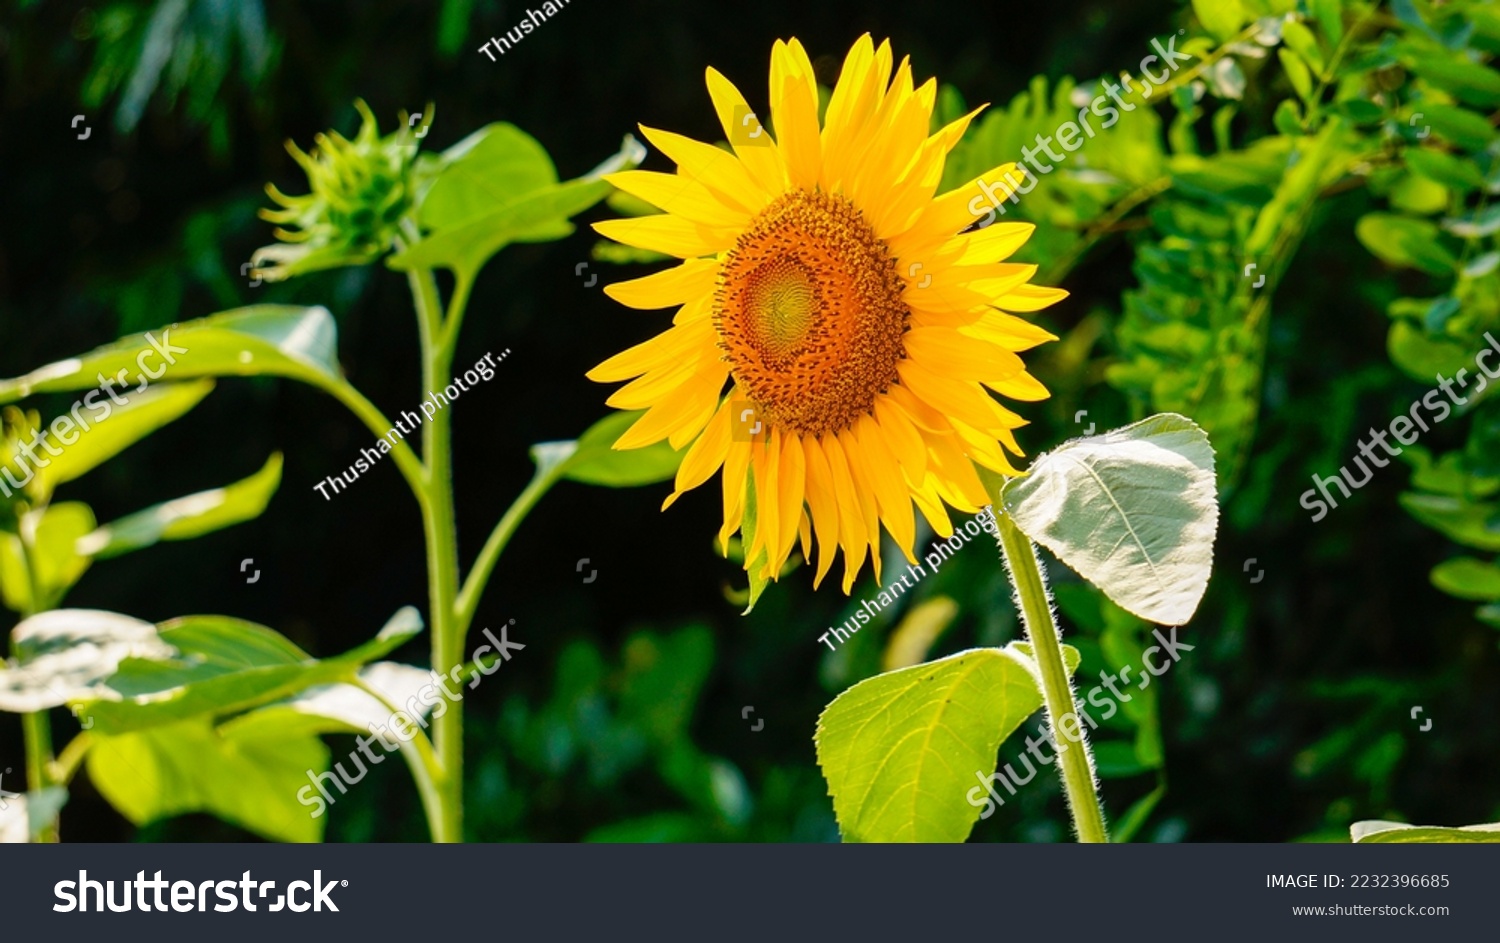 Sunflower natural background, Sunflower blooming, Sunflower oil improves skin health and promote cell regeneration #2232396685